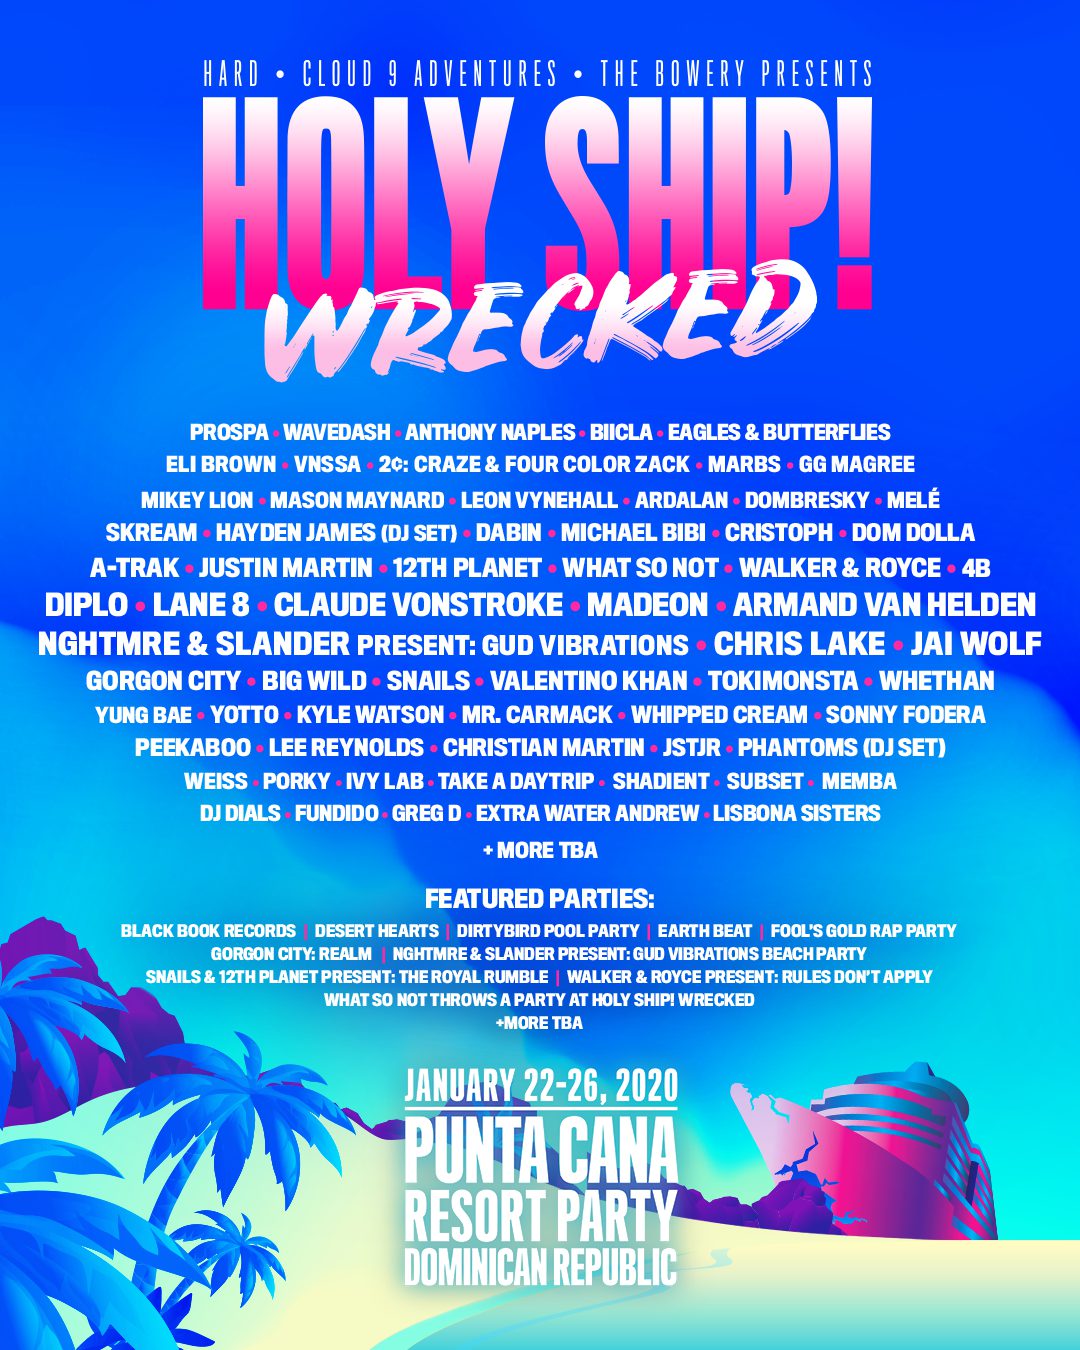 Holy Ship Wrecked 2019 Lineup